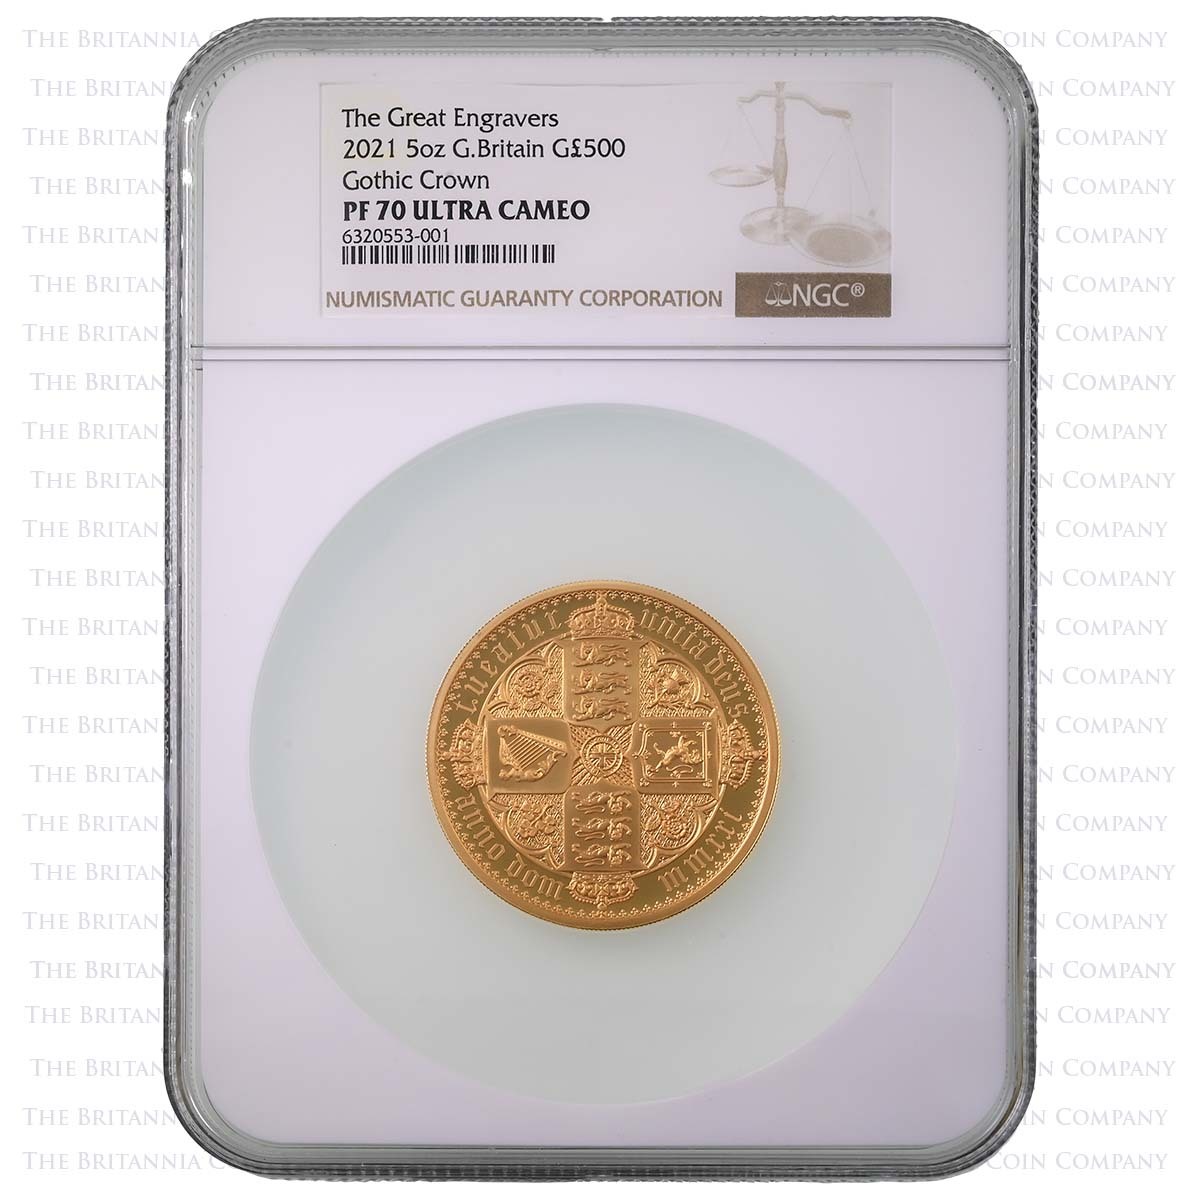 2021 Great Engravers Gothic Quartered Arms Five Ounce Gold Proof Coin NGC Graded PF 70 Ultra Cameo Holder